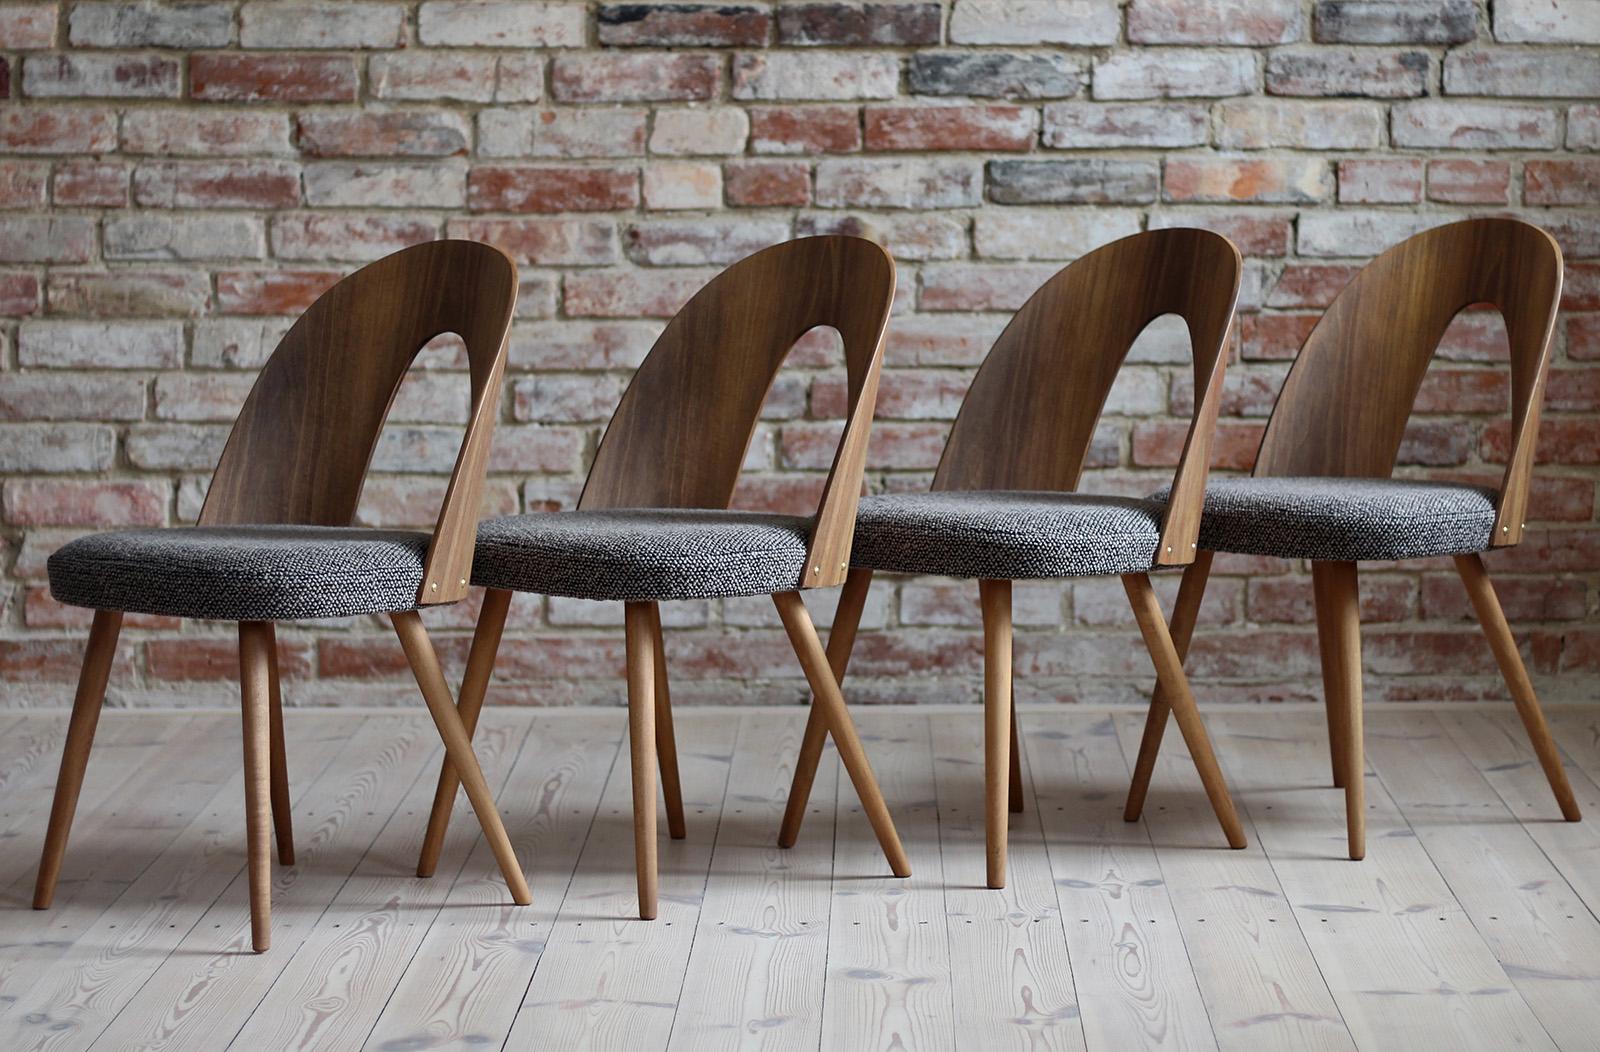 This set of four vintage dining chairs was designed by Czech designer Antonin Šuman in the 1960s. The chairs have been completely restored finished with high-quality oil that gave them beautiful and natural finish. The set is reupholstered with